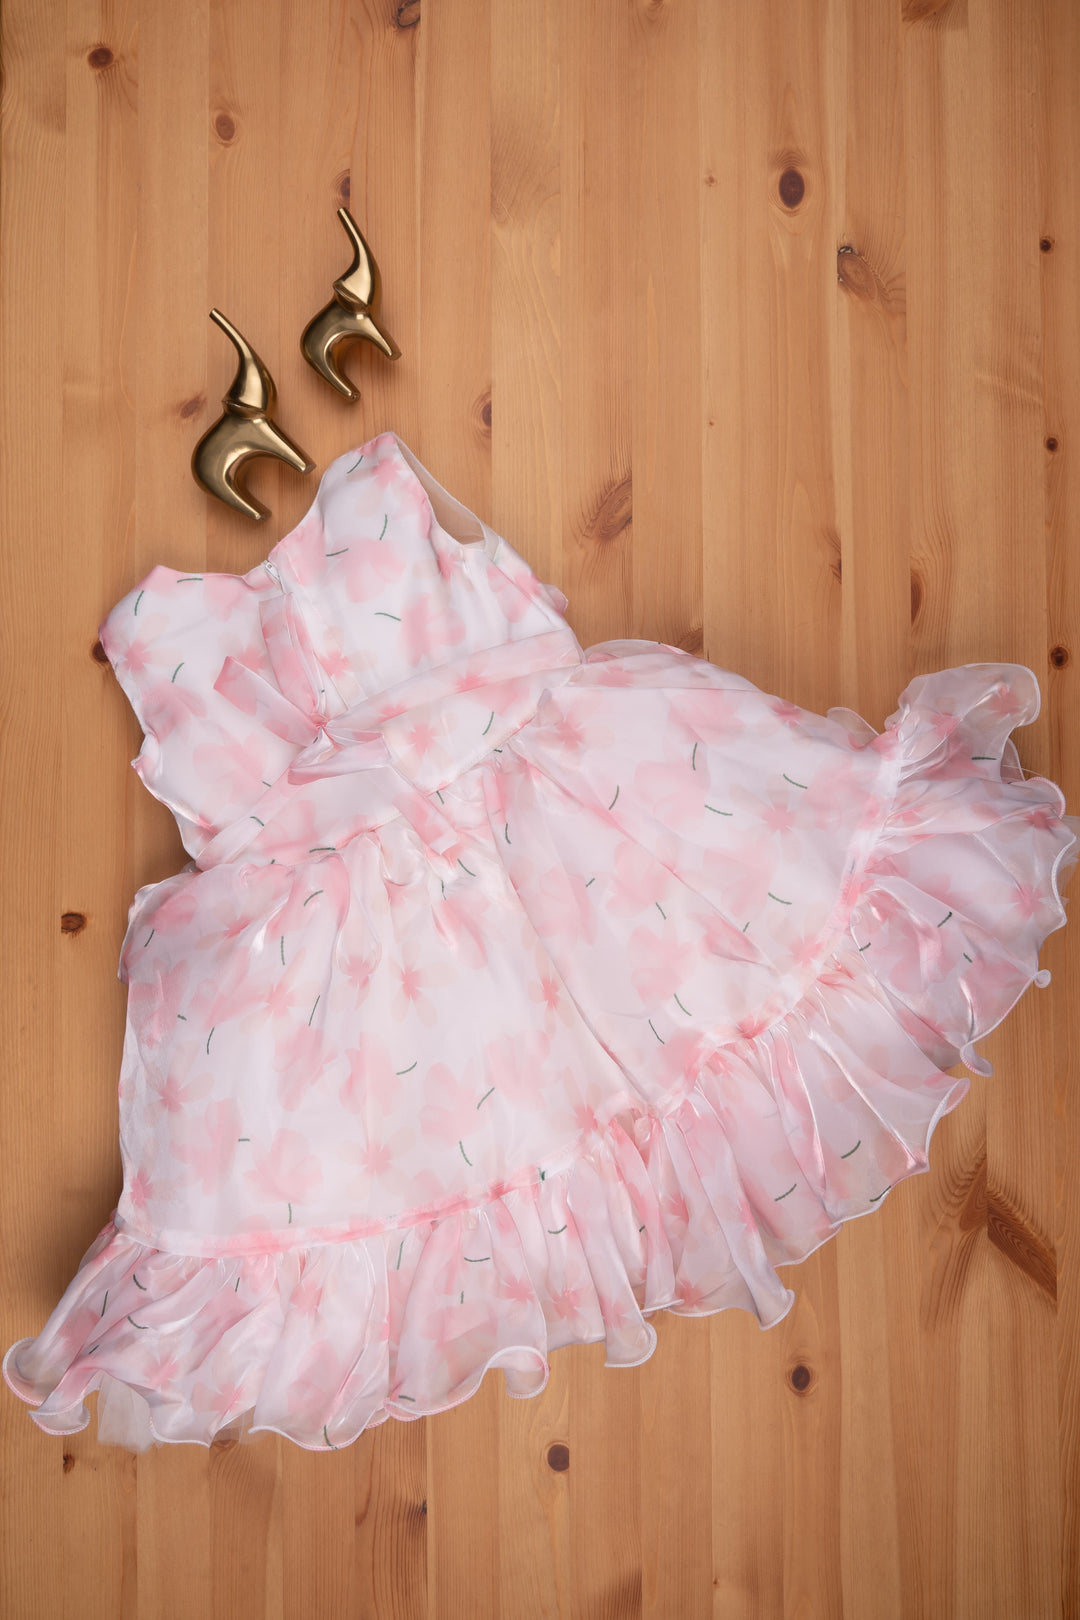 The Nesavu Party Frock Designer Pink Organza Party Dress: Floral Bow & Flared Detail for Young Girls Nesavu Floral Designer Party Wear for Girls | Organza Dresses for Little Girls | The Nesavu